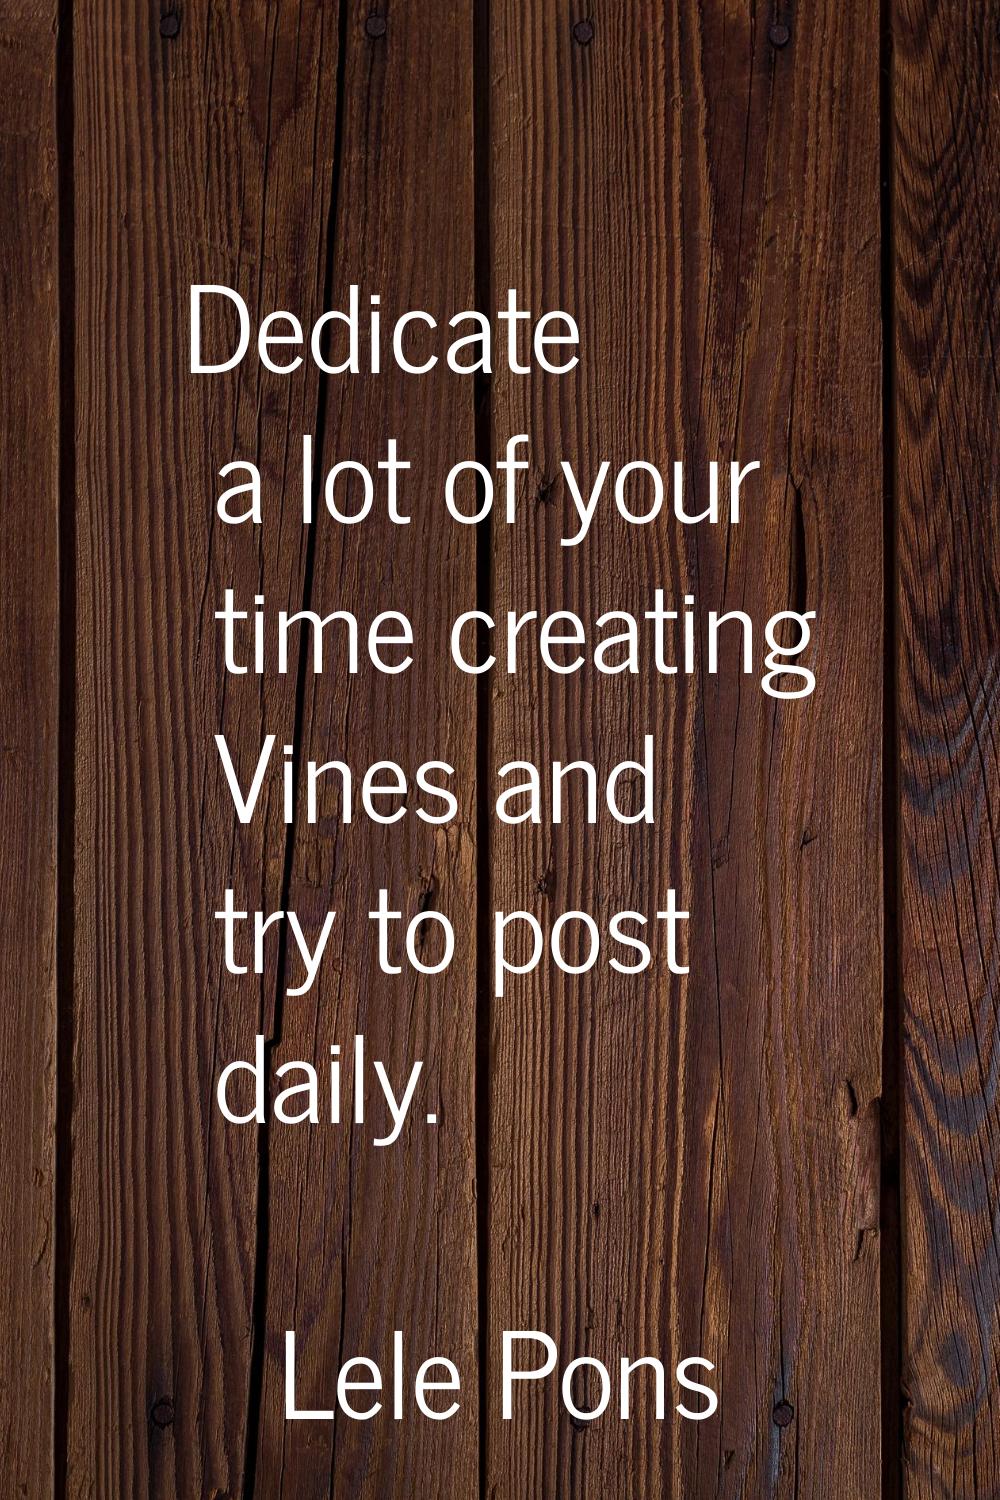 Dedicate a lot of your time creating Vines and try to post daily.